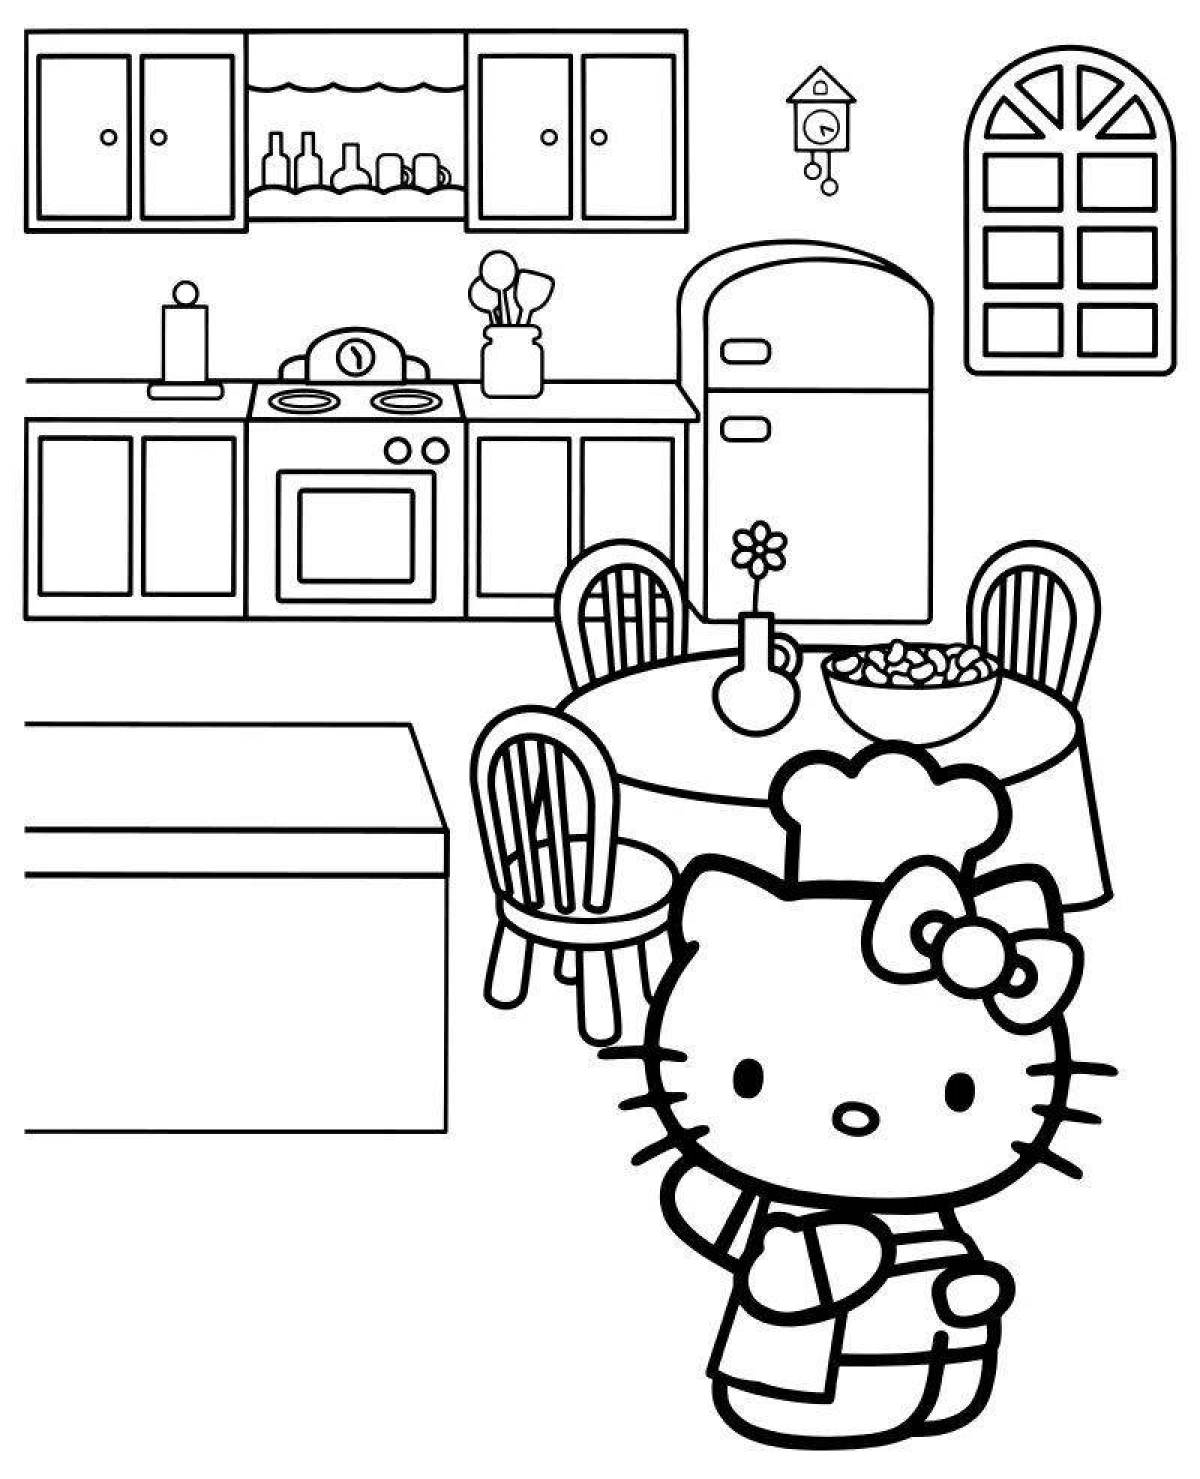 Coloring book traditional kitchen furniture